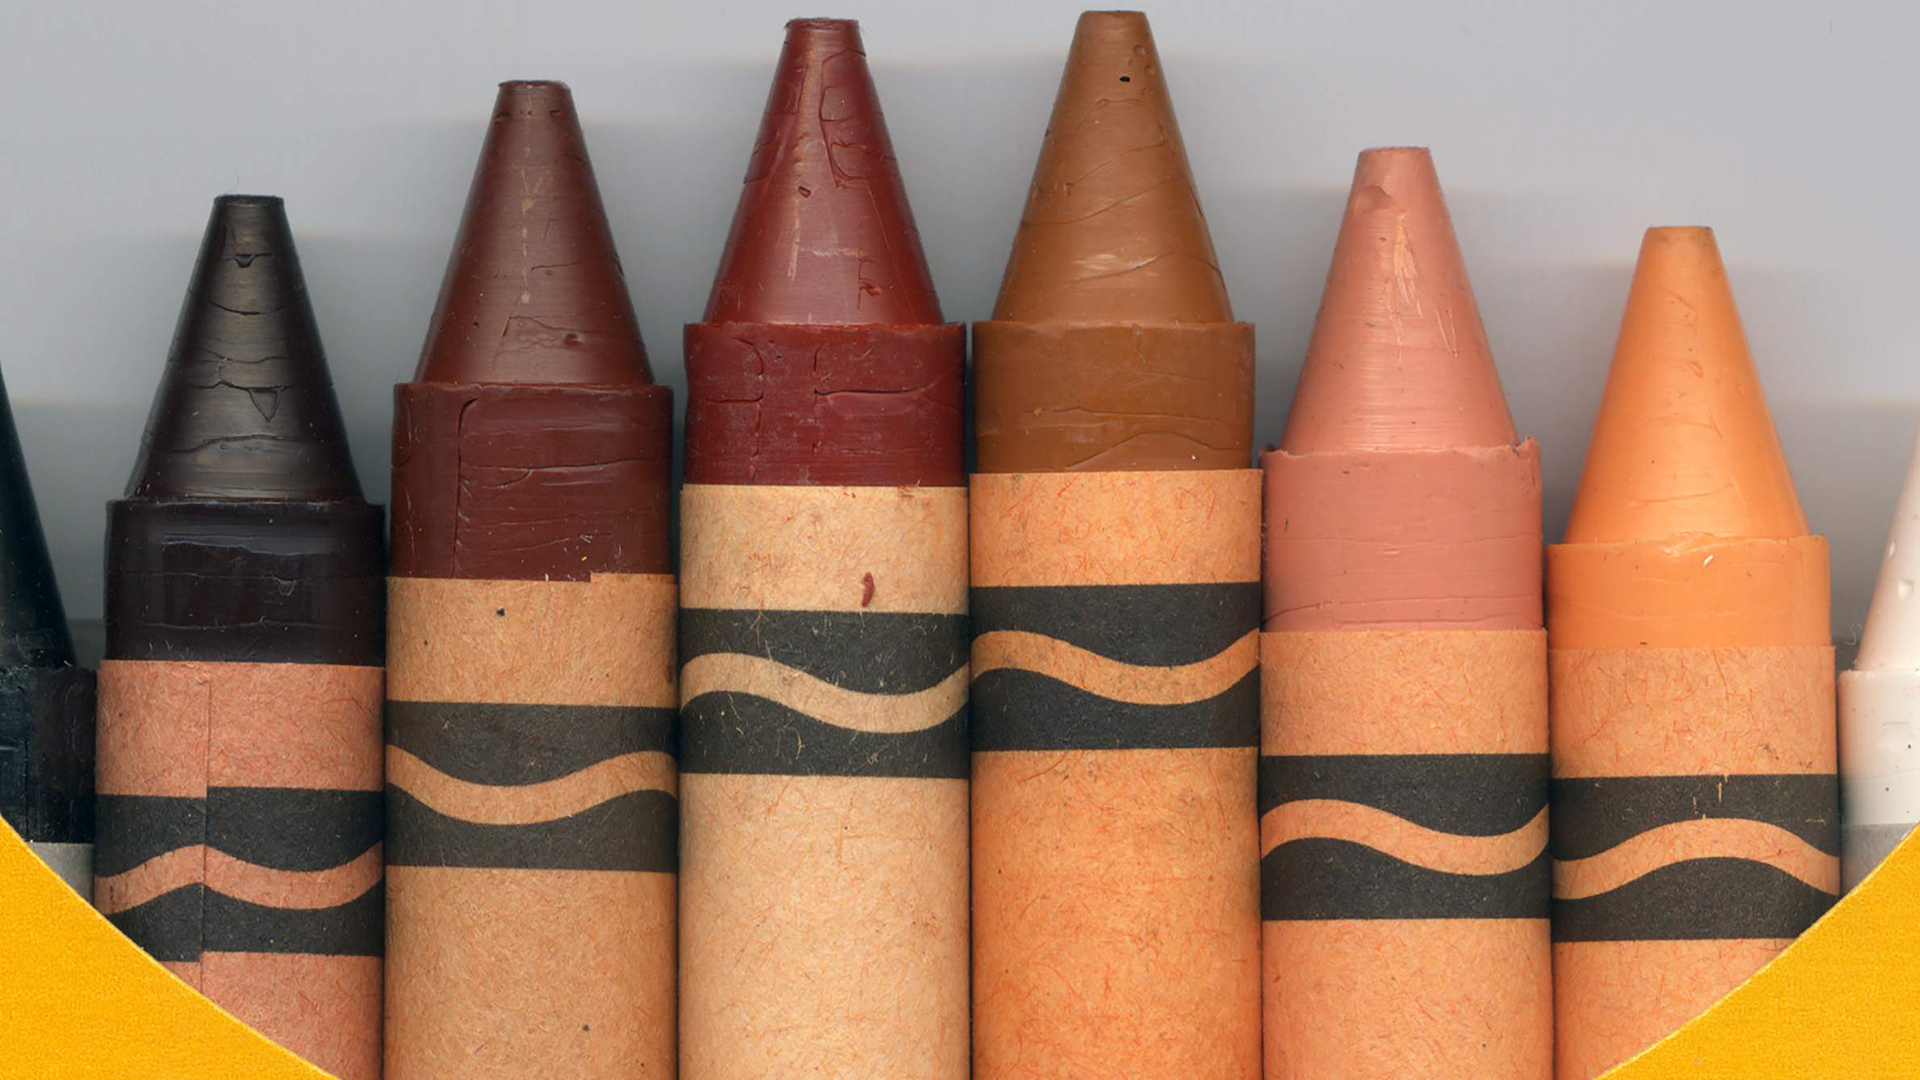 Box of crayola crayons showing a variation of skin tones